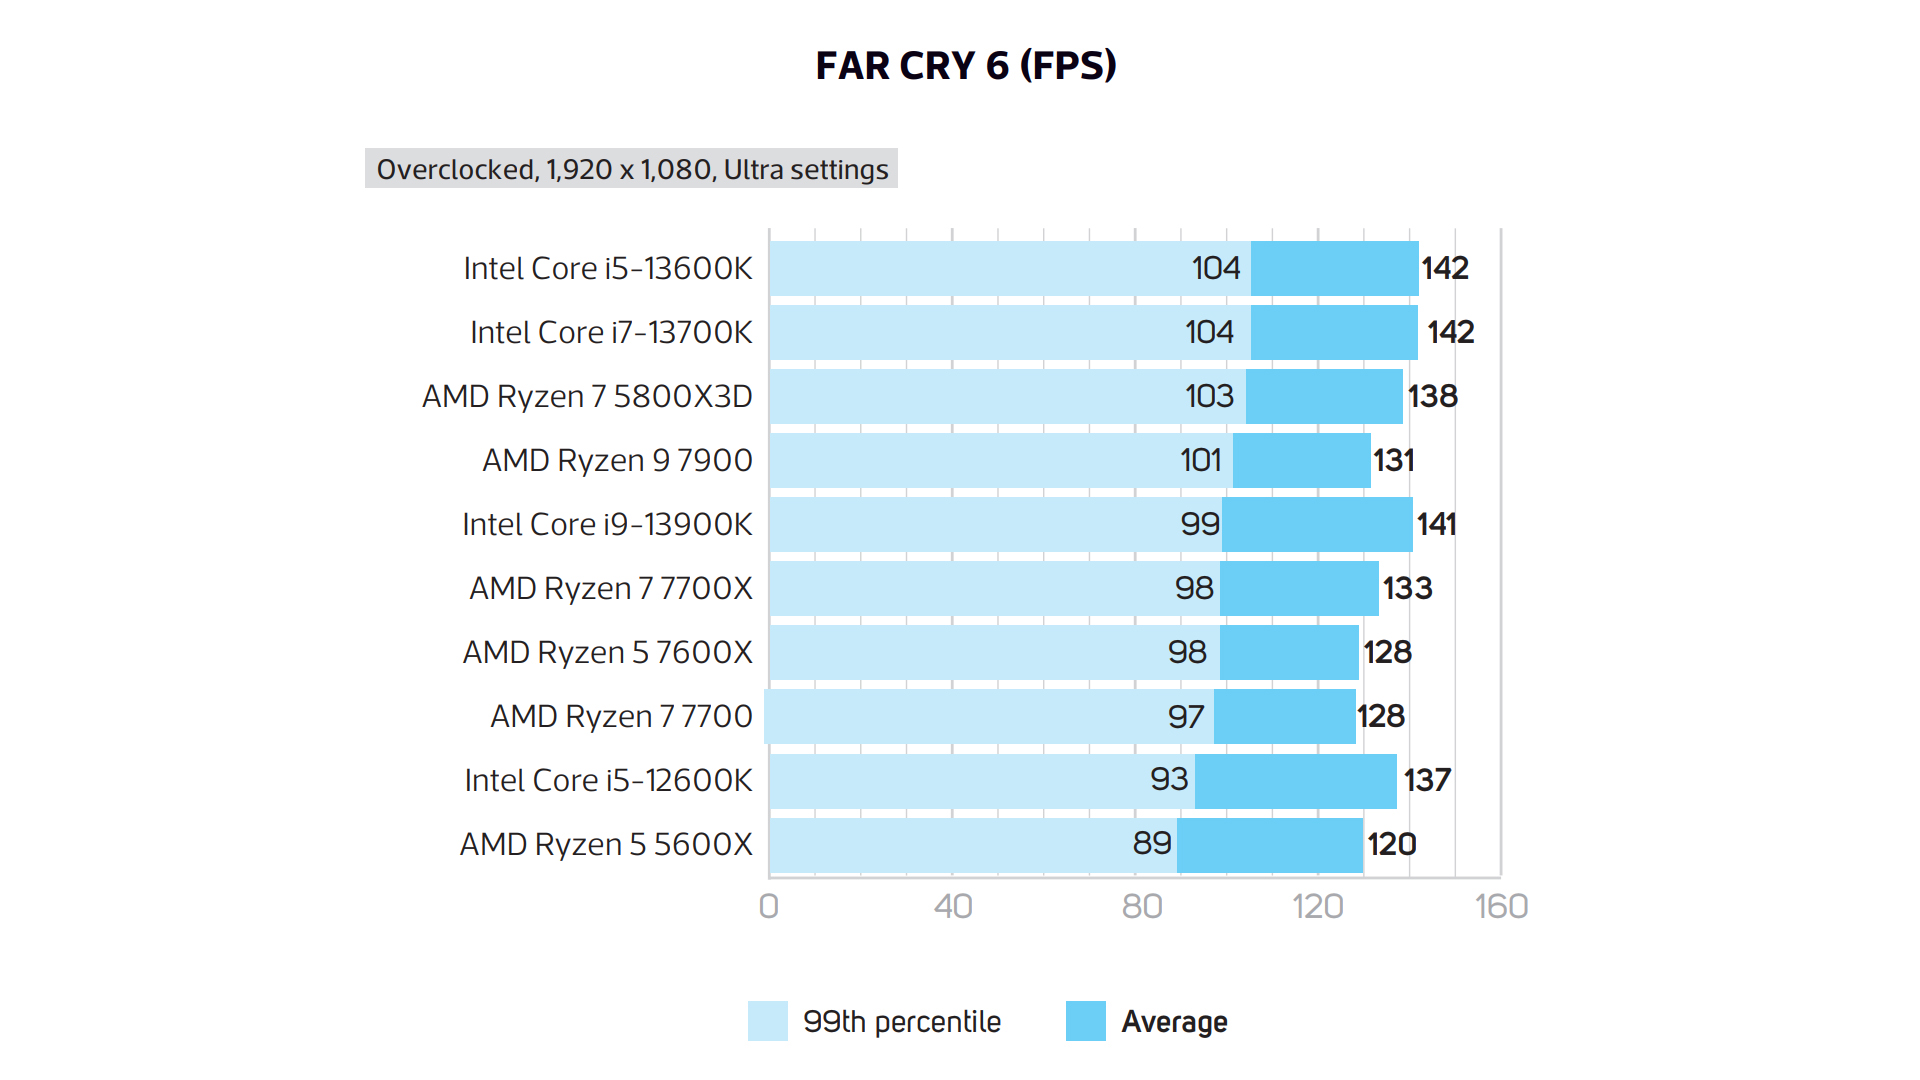 Intel 13700K is just so much better!